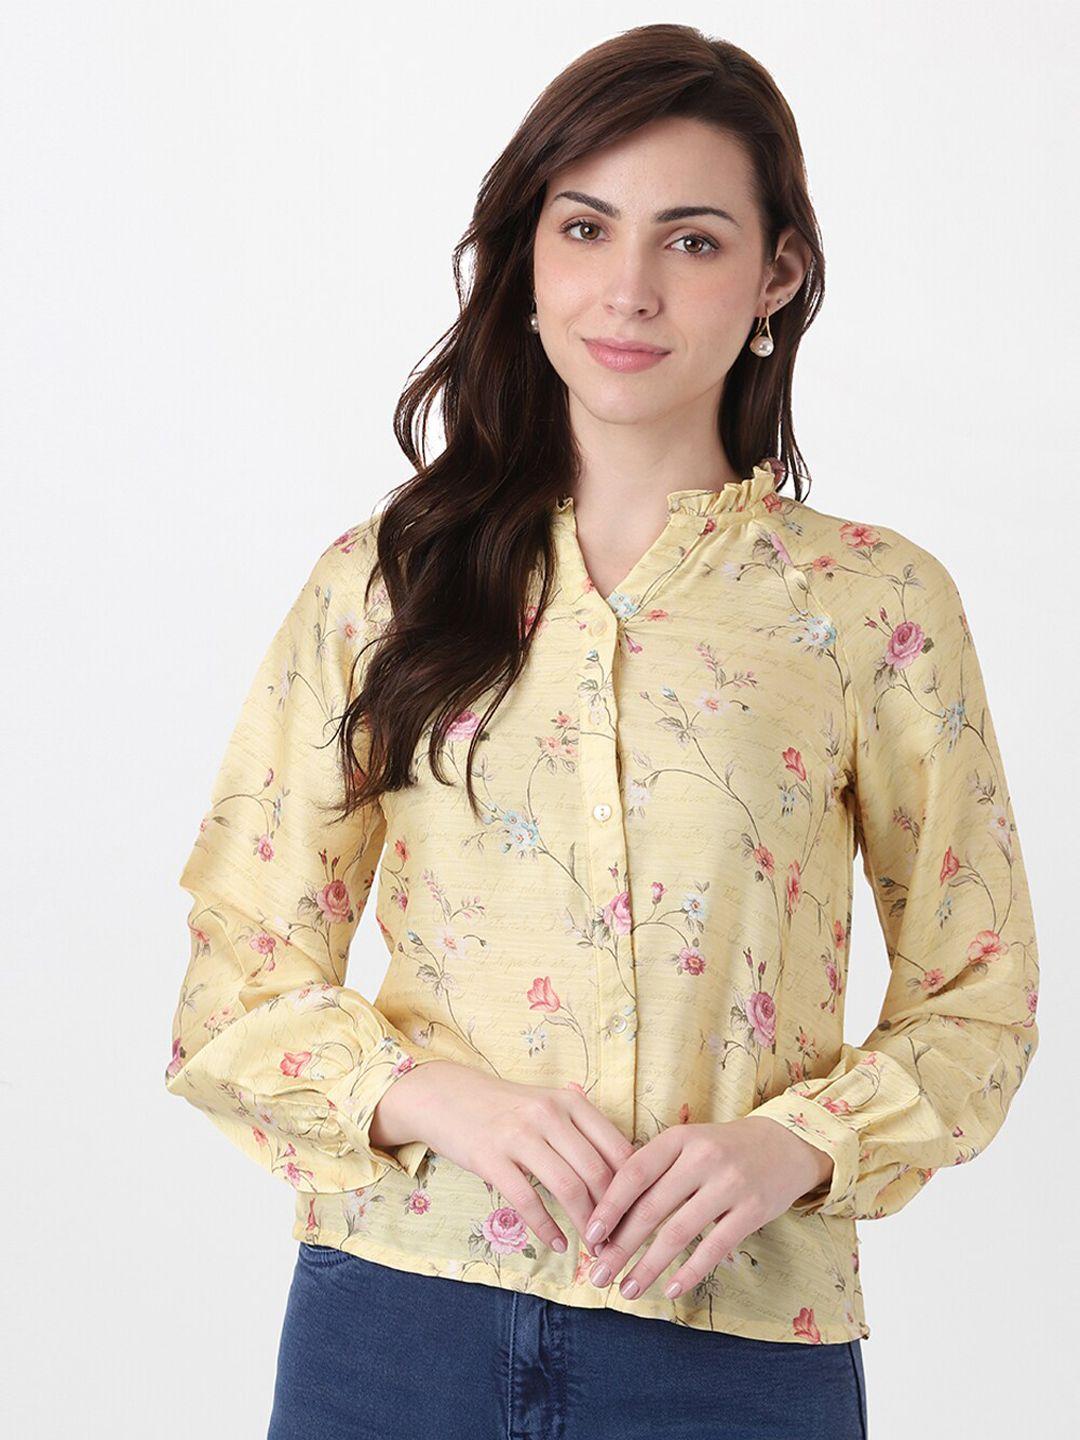 and yellow floral print top